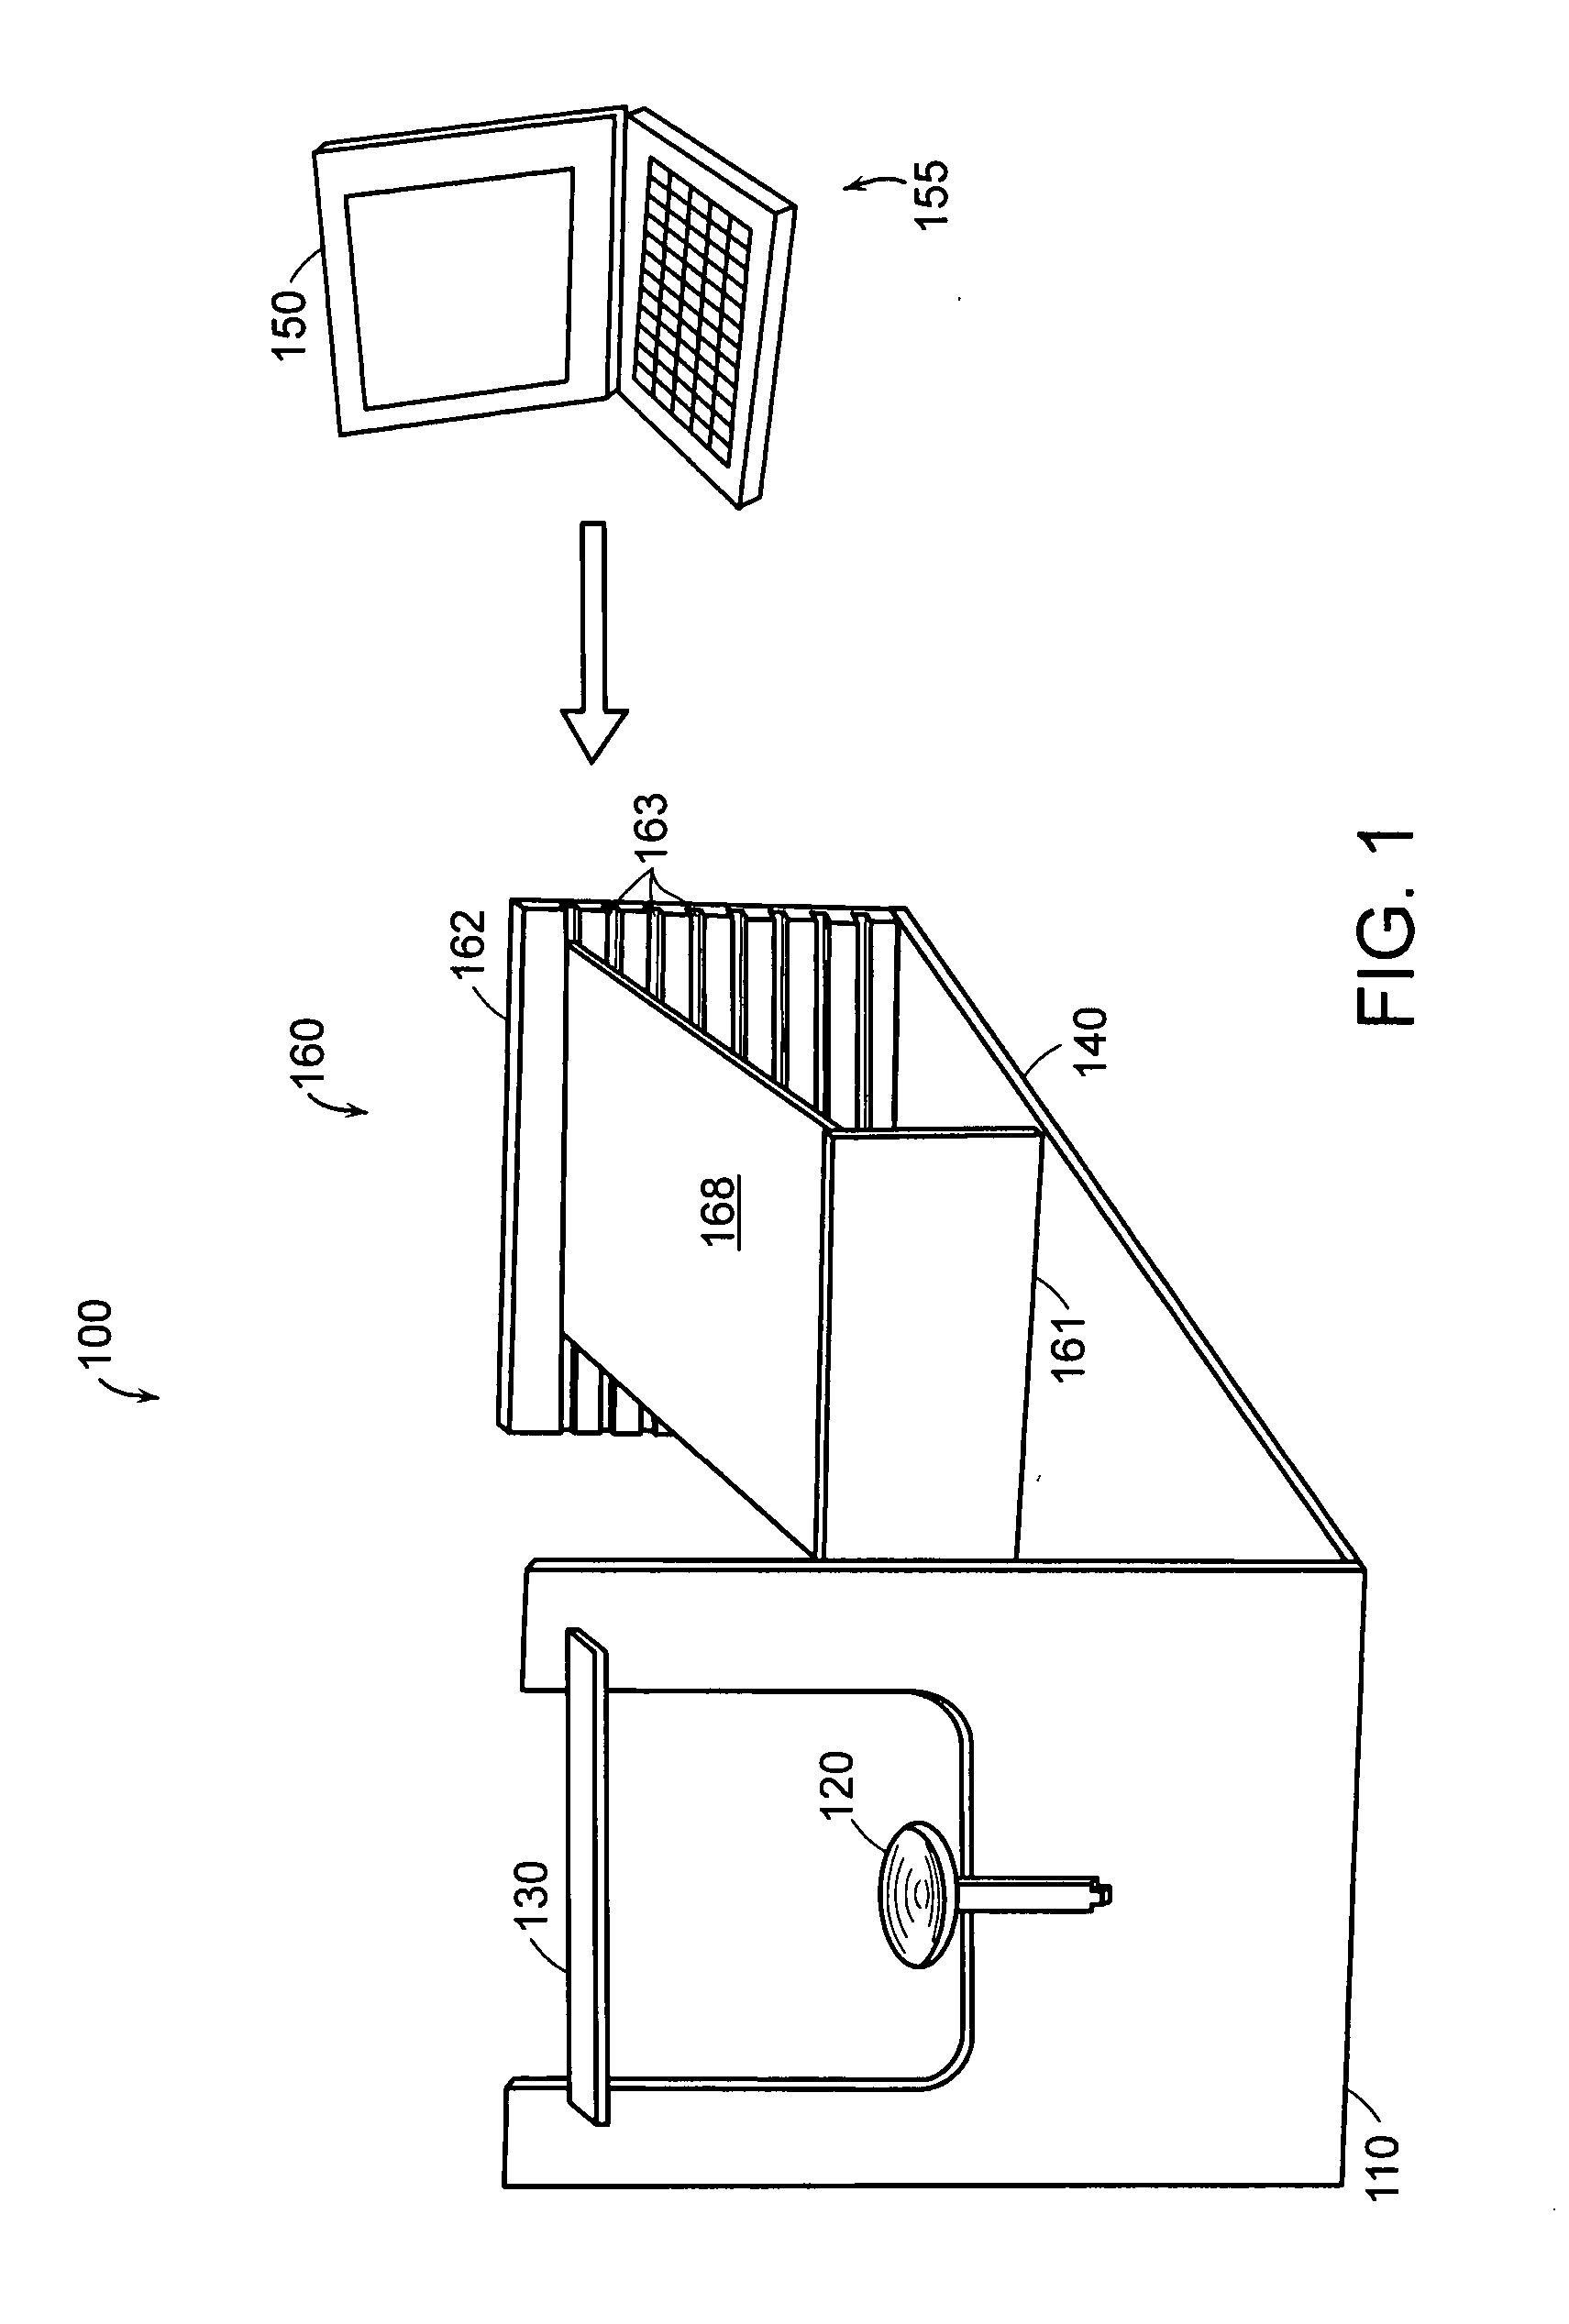 Method and device for guiding a user's head during vision training